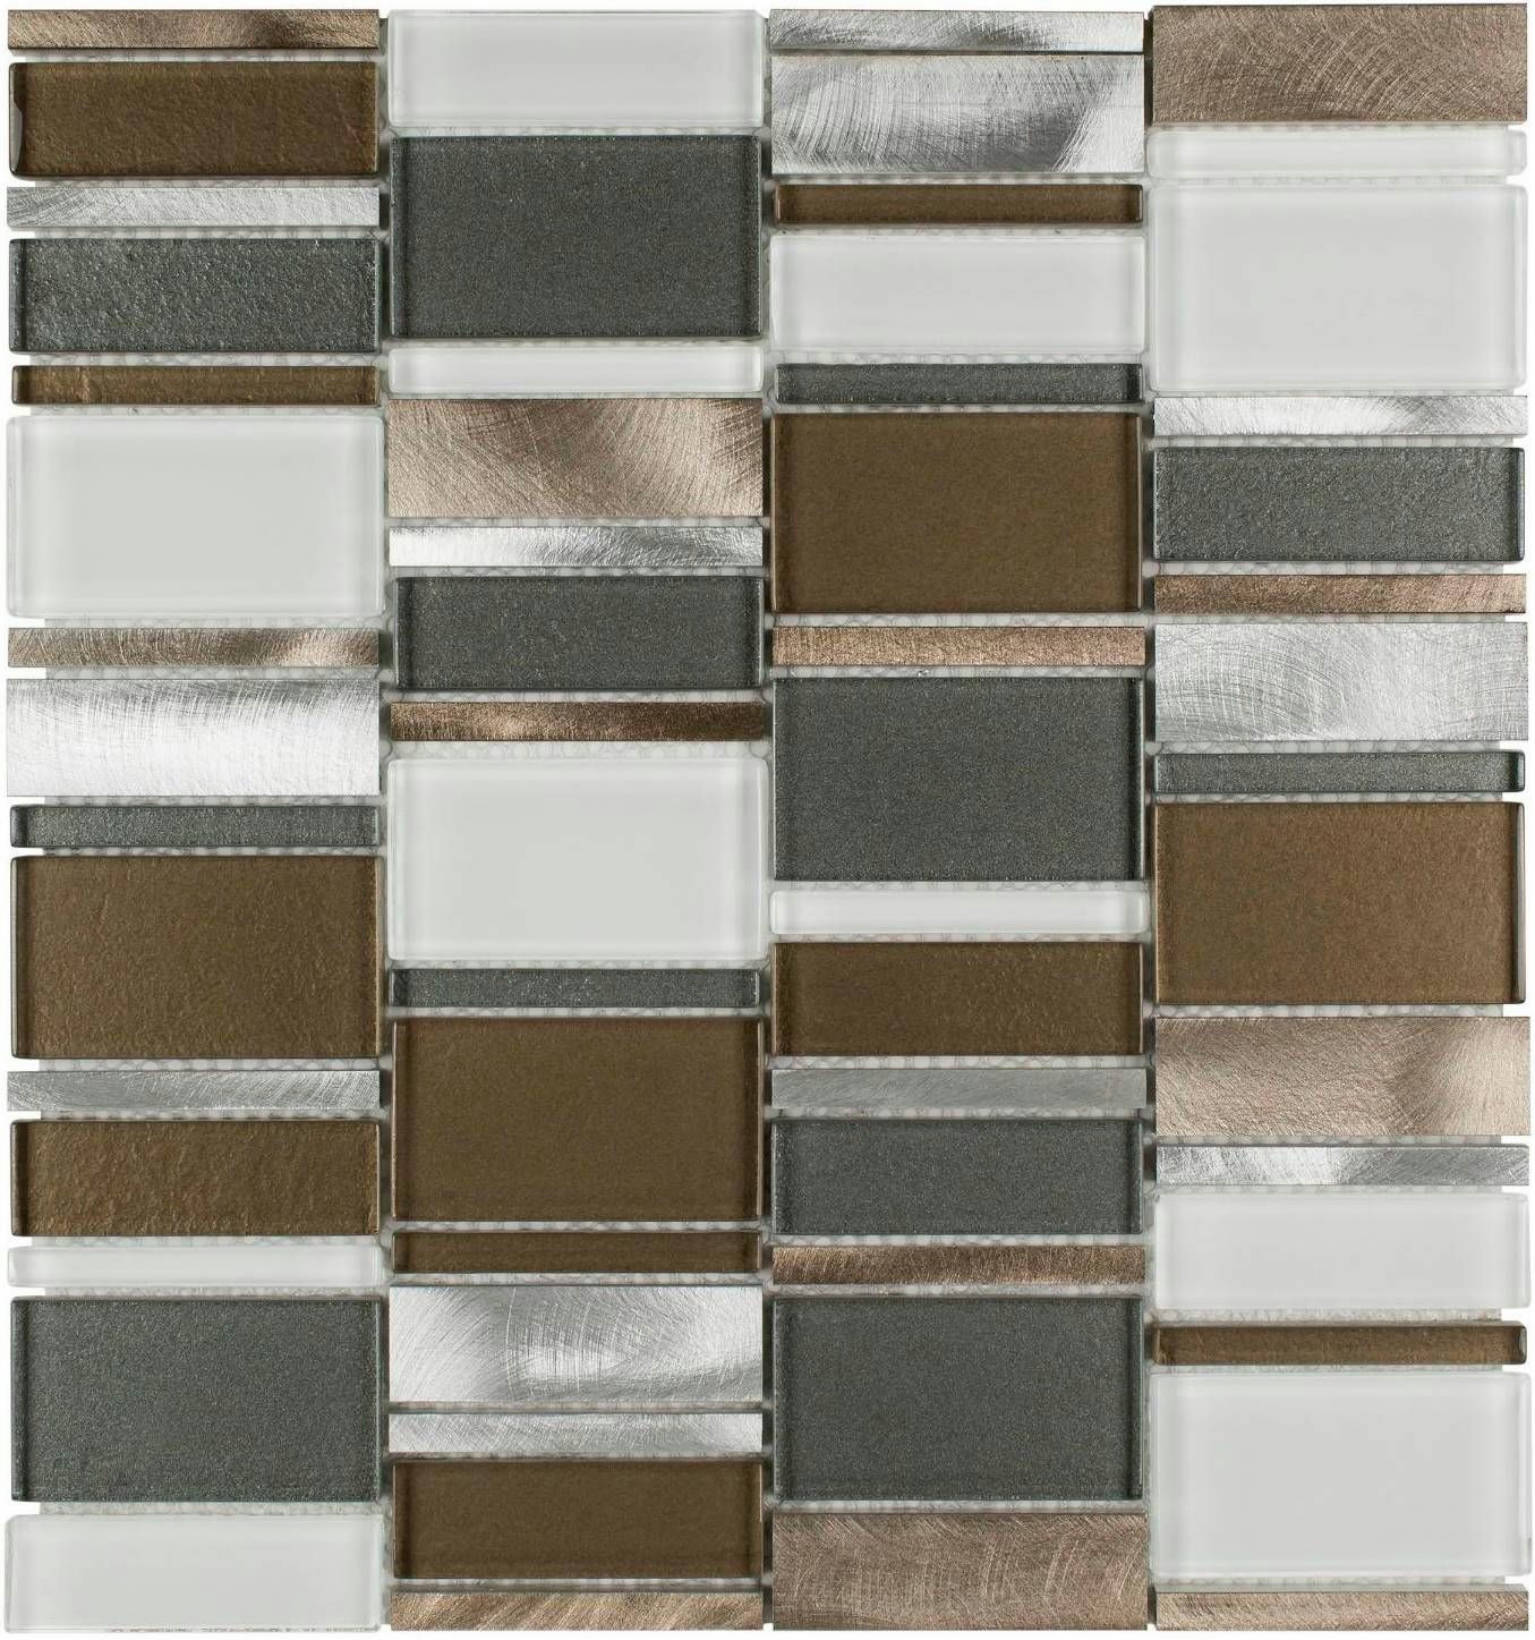 ST095 | Stones & More | Finest selection of Mosaics, Glass, Tile and Stone